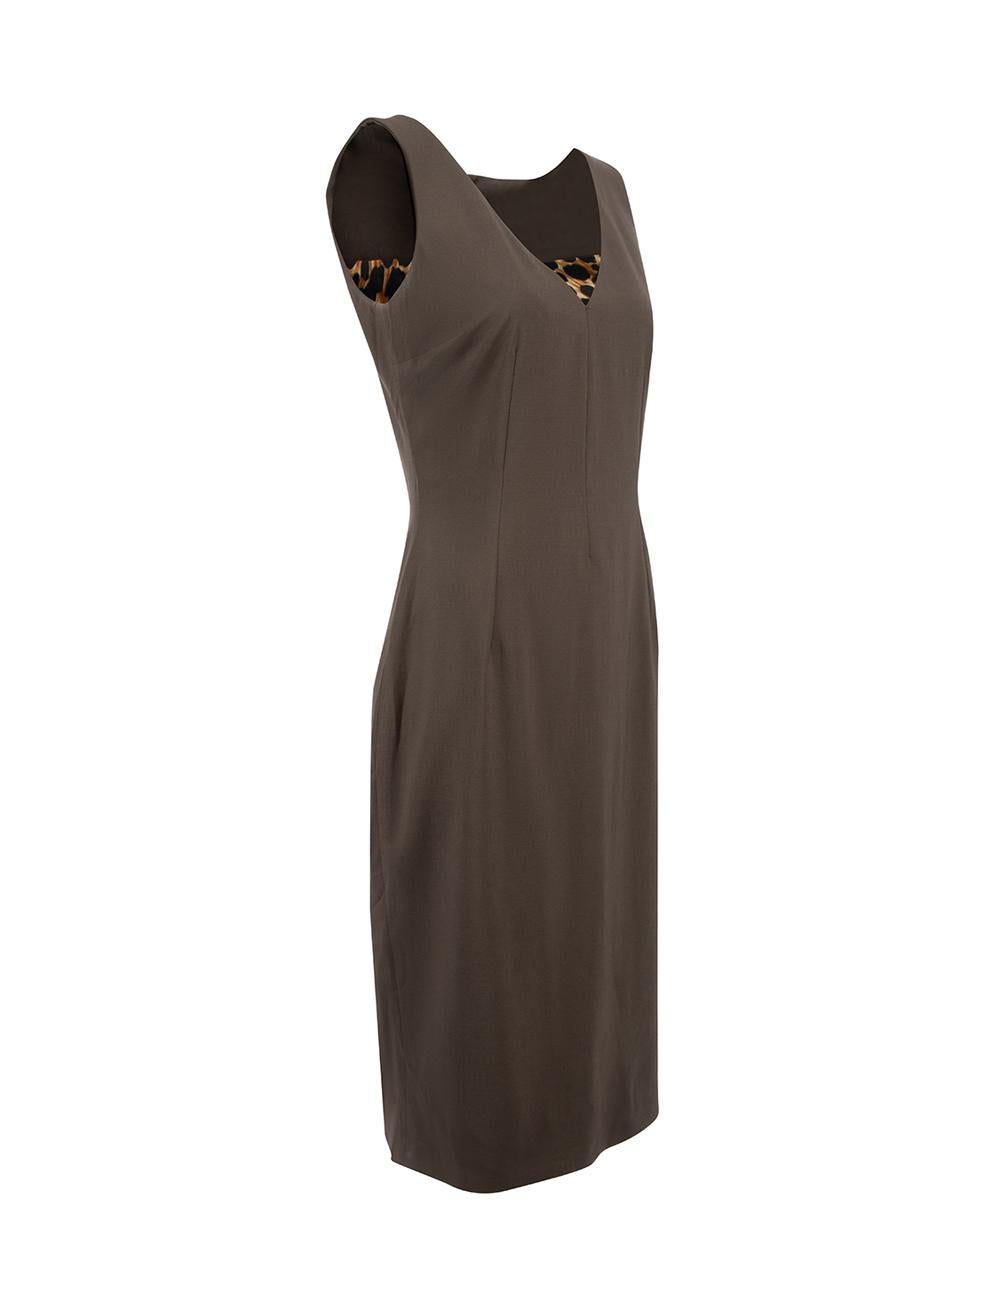 CONDITION is Very good. Minimal wear to dress is evident. Minimal wear to the underarms with discolouration on this used Dolce & Gabbana designer resale item. 



Details


Brown

Wool

V-neck

Body-con midi dress

Figure hugging